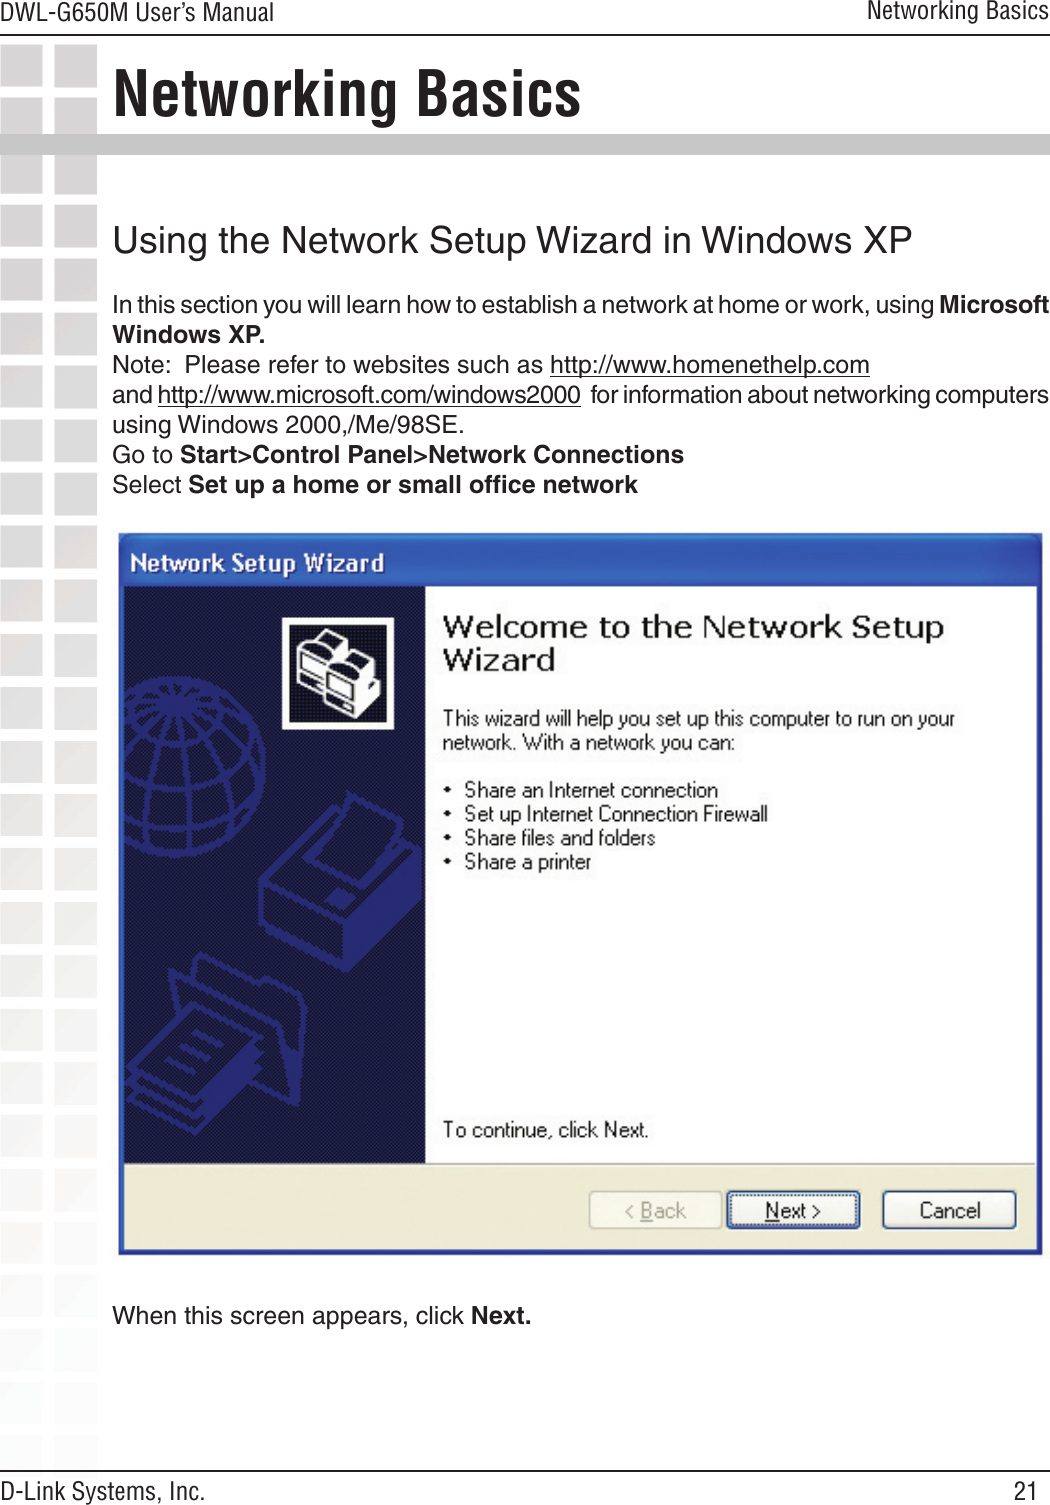 21DWL-G650M User’s ManualD-Link Systems, Inc.Networking BasicsNetworking BasicsUsing the Network Setup Wizard in Windows XPIn this section you will learn how to establish a network at home or work, using Microsoft Windows XP.  Note:  Please refer to websites such as http://www.homenethelp.comand http://www.microsoft.com/windows2000  for information about networking computers using Windows 2000,/Me/98SE.Go to Start&gt;Control Panel&gt;Network ConnectionsSelect Set up a home or small ofﬁce networkWhen this screen appears, click Next.